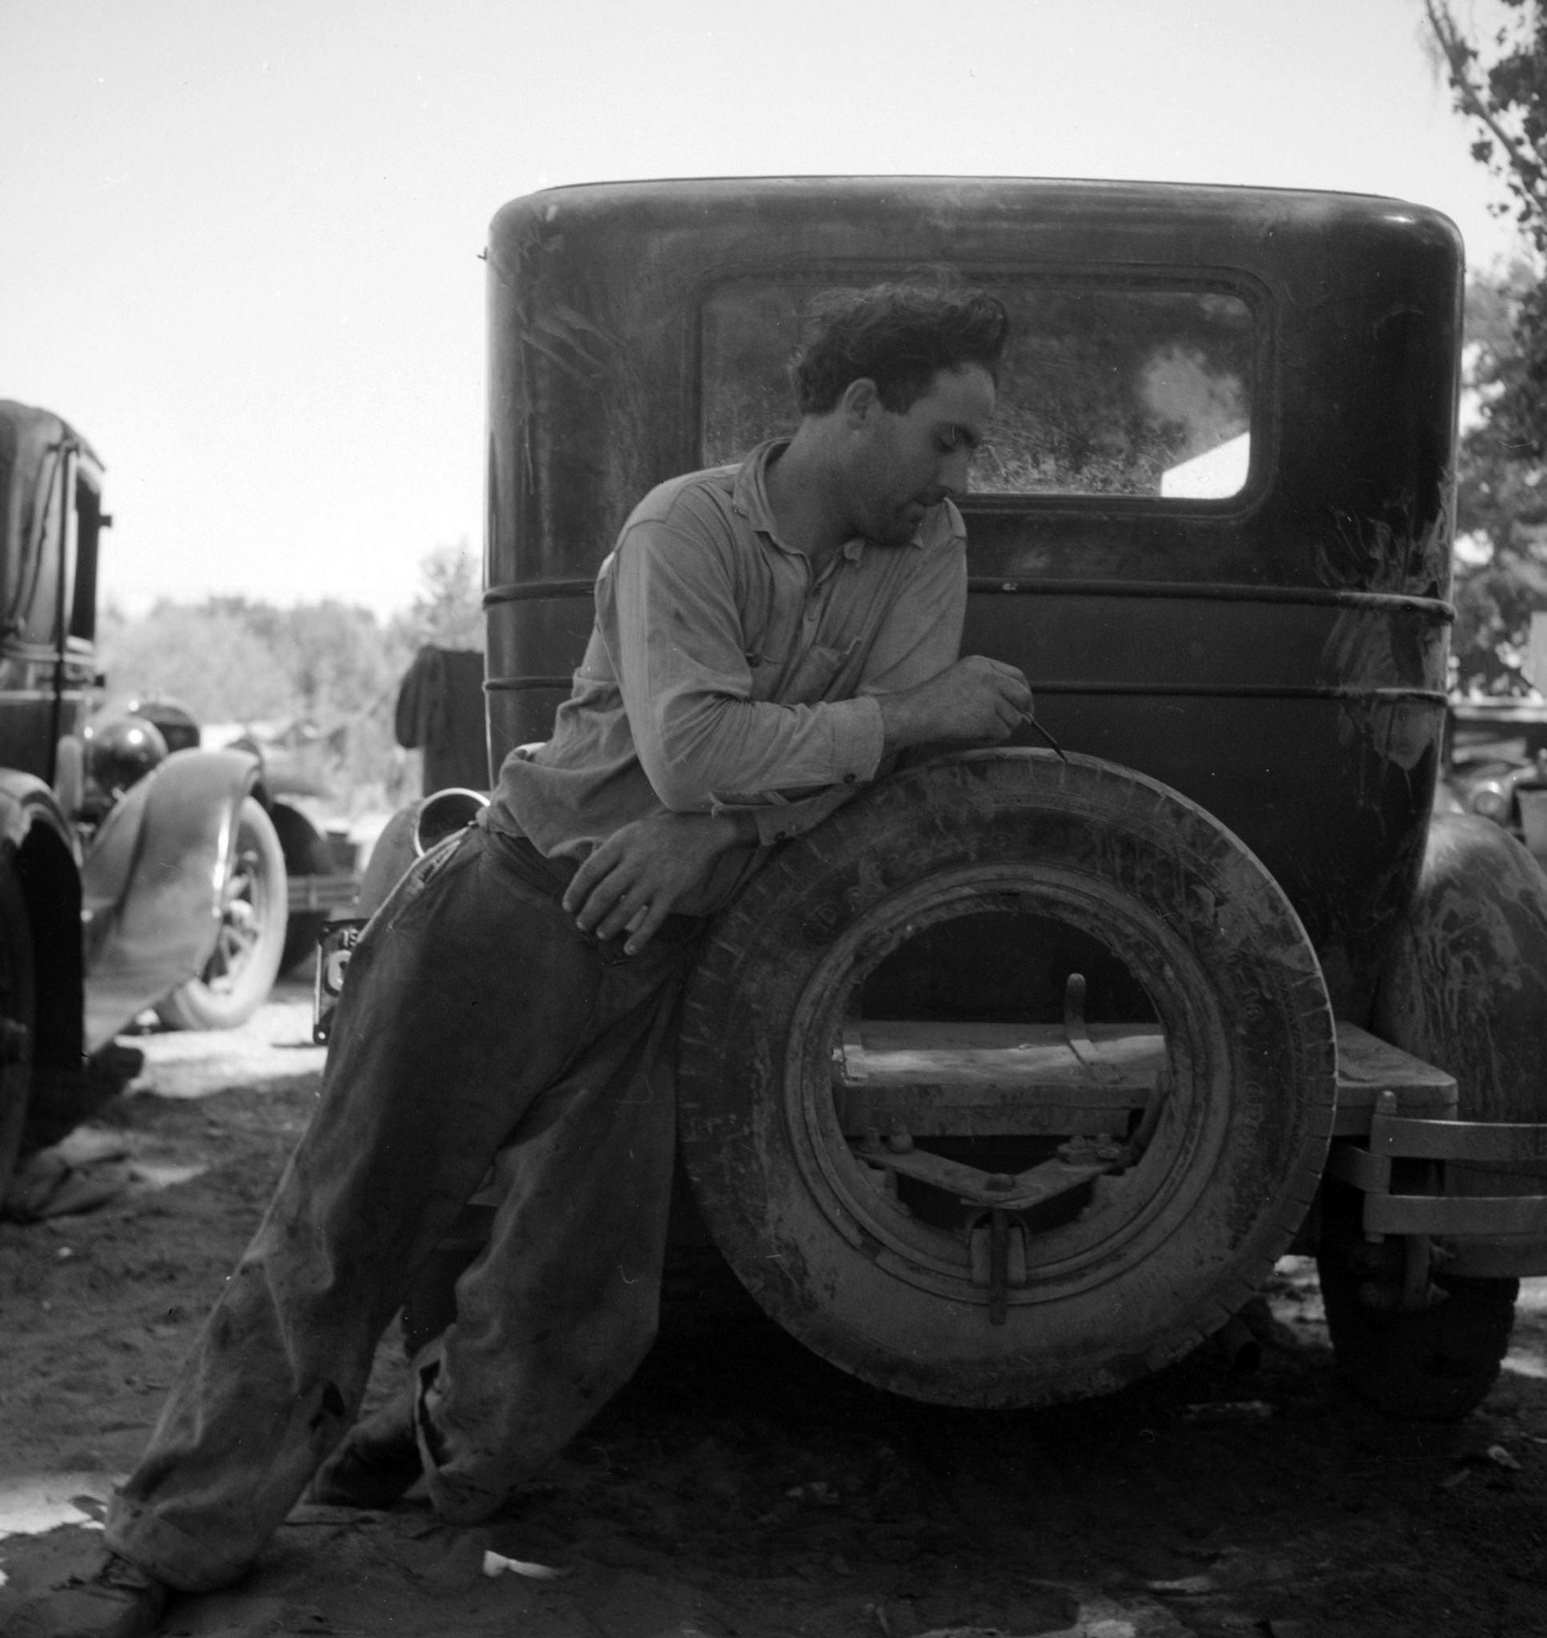 Migrant agricultural worker in Marysville migrant camp (trying to figure out his year's earnings). California, 1930s